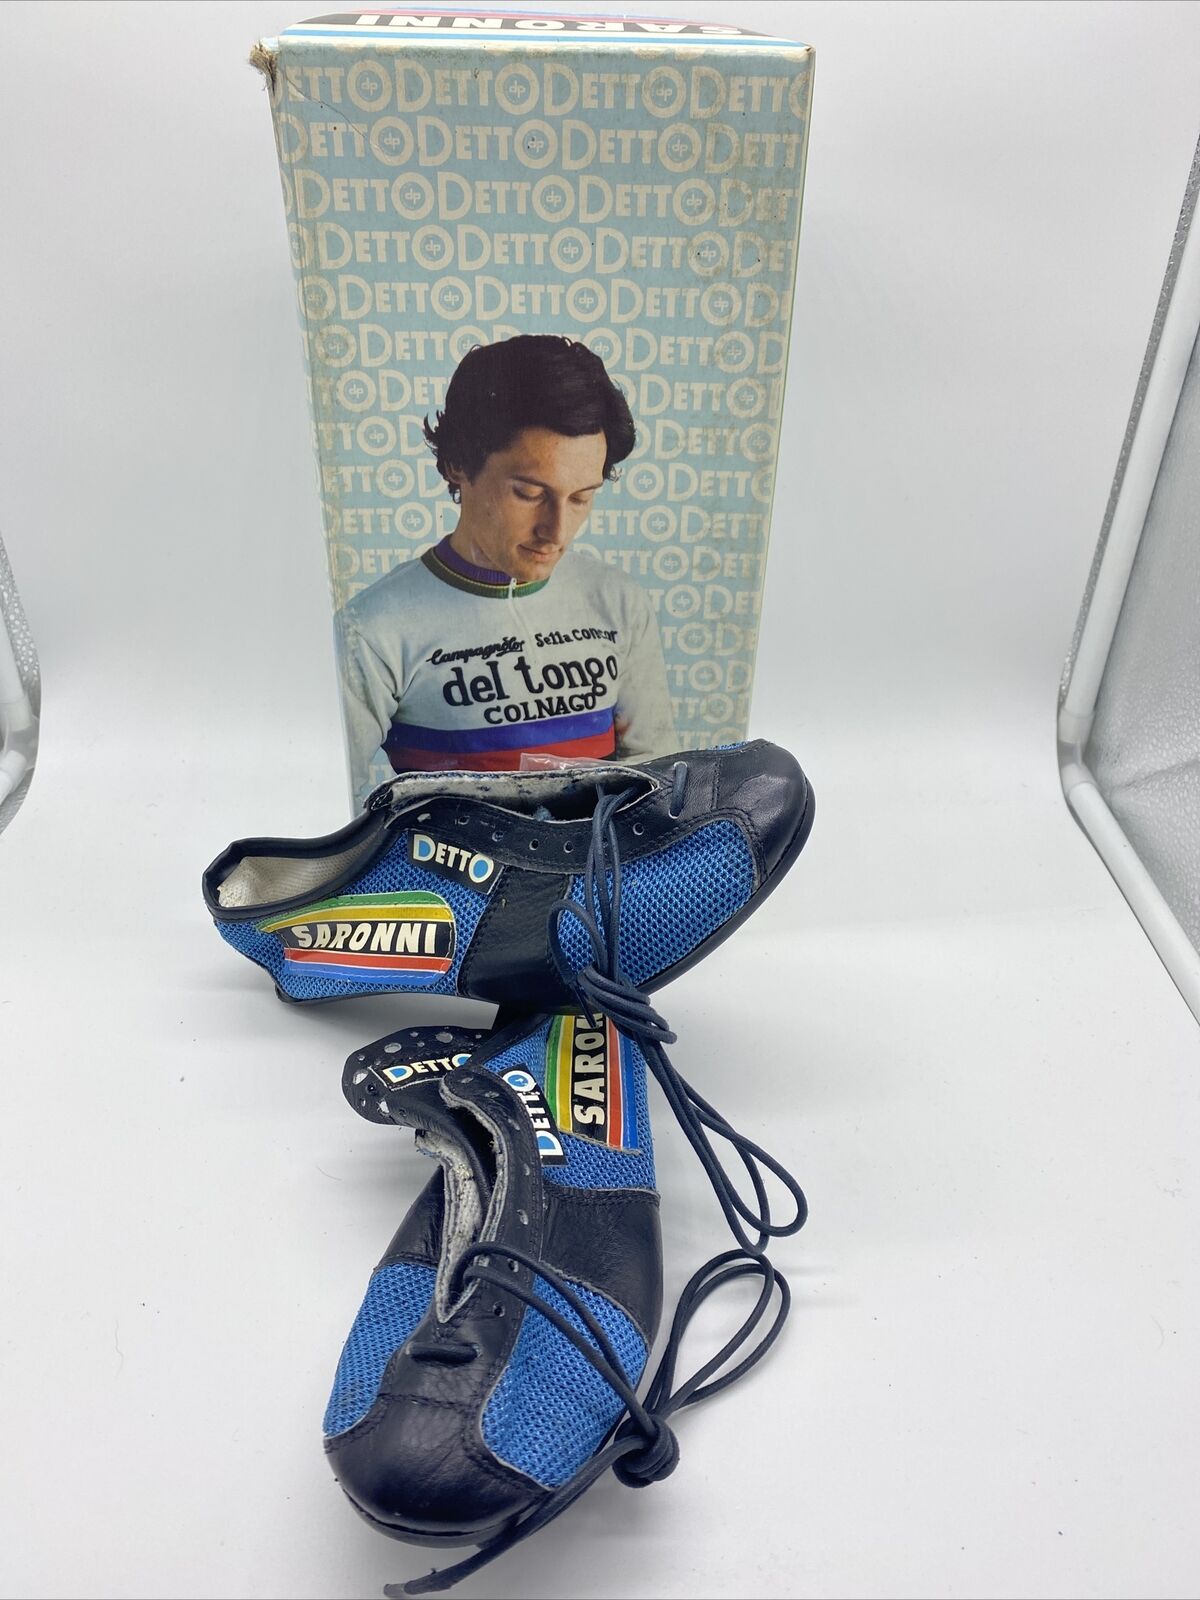 Vintage Nos New Detto Saronni Art. 88 Blue Leather Cycling Shoes 37 + Cleats